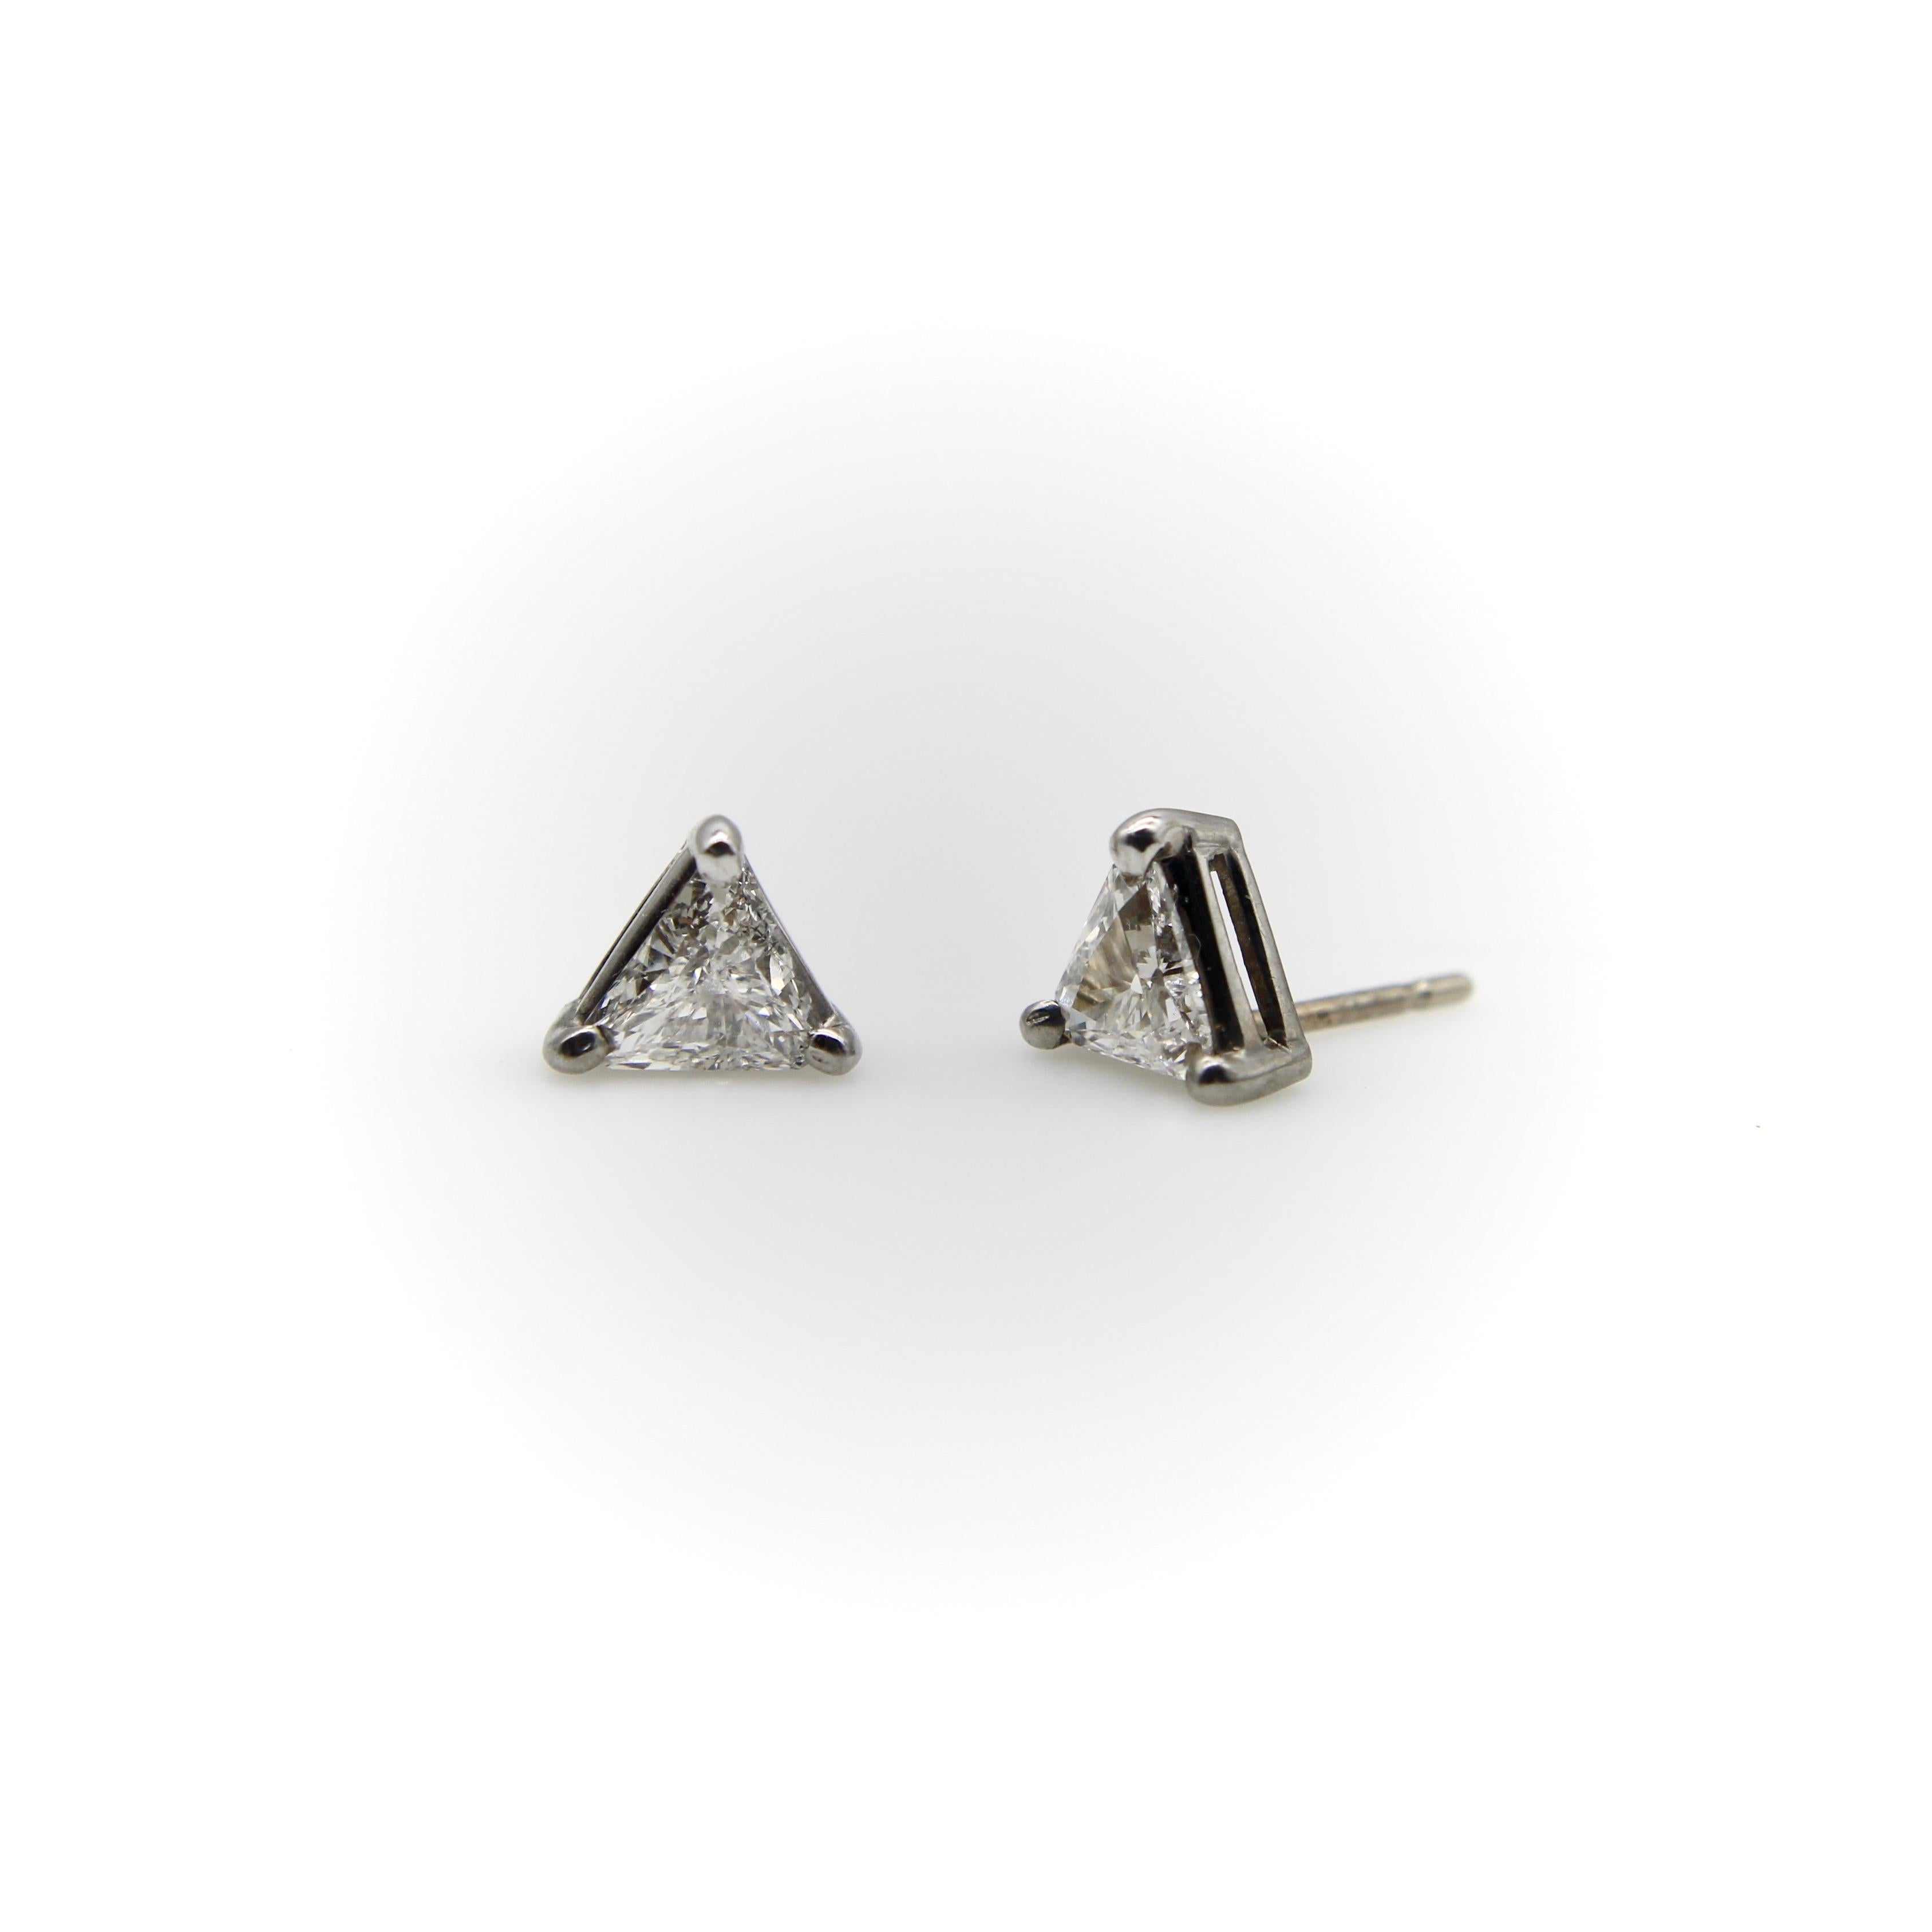 Vintage 14K White Gold Trilliant Diamond Stud Earrings  In Good Condition For Sale In Venice, CA